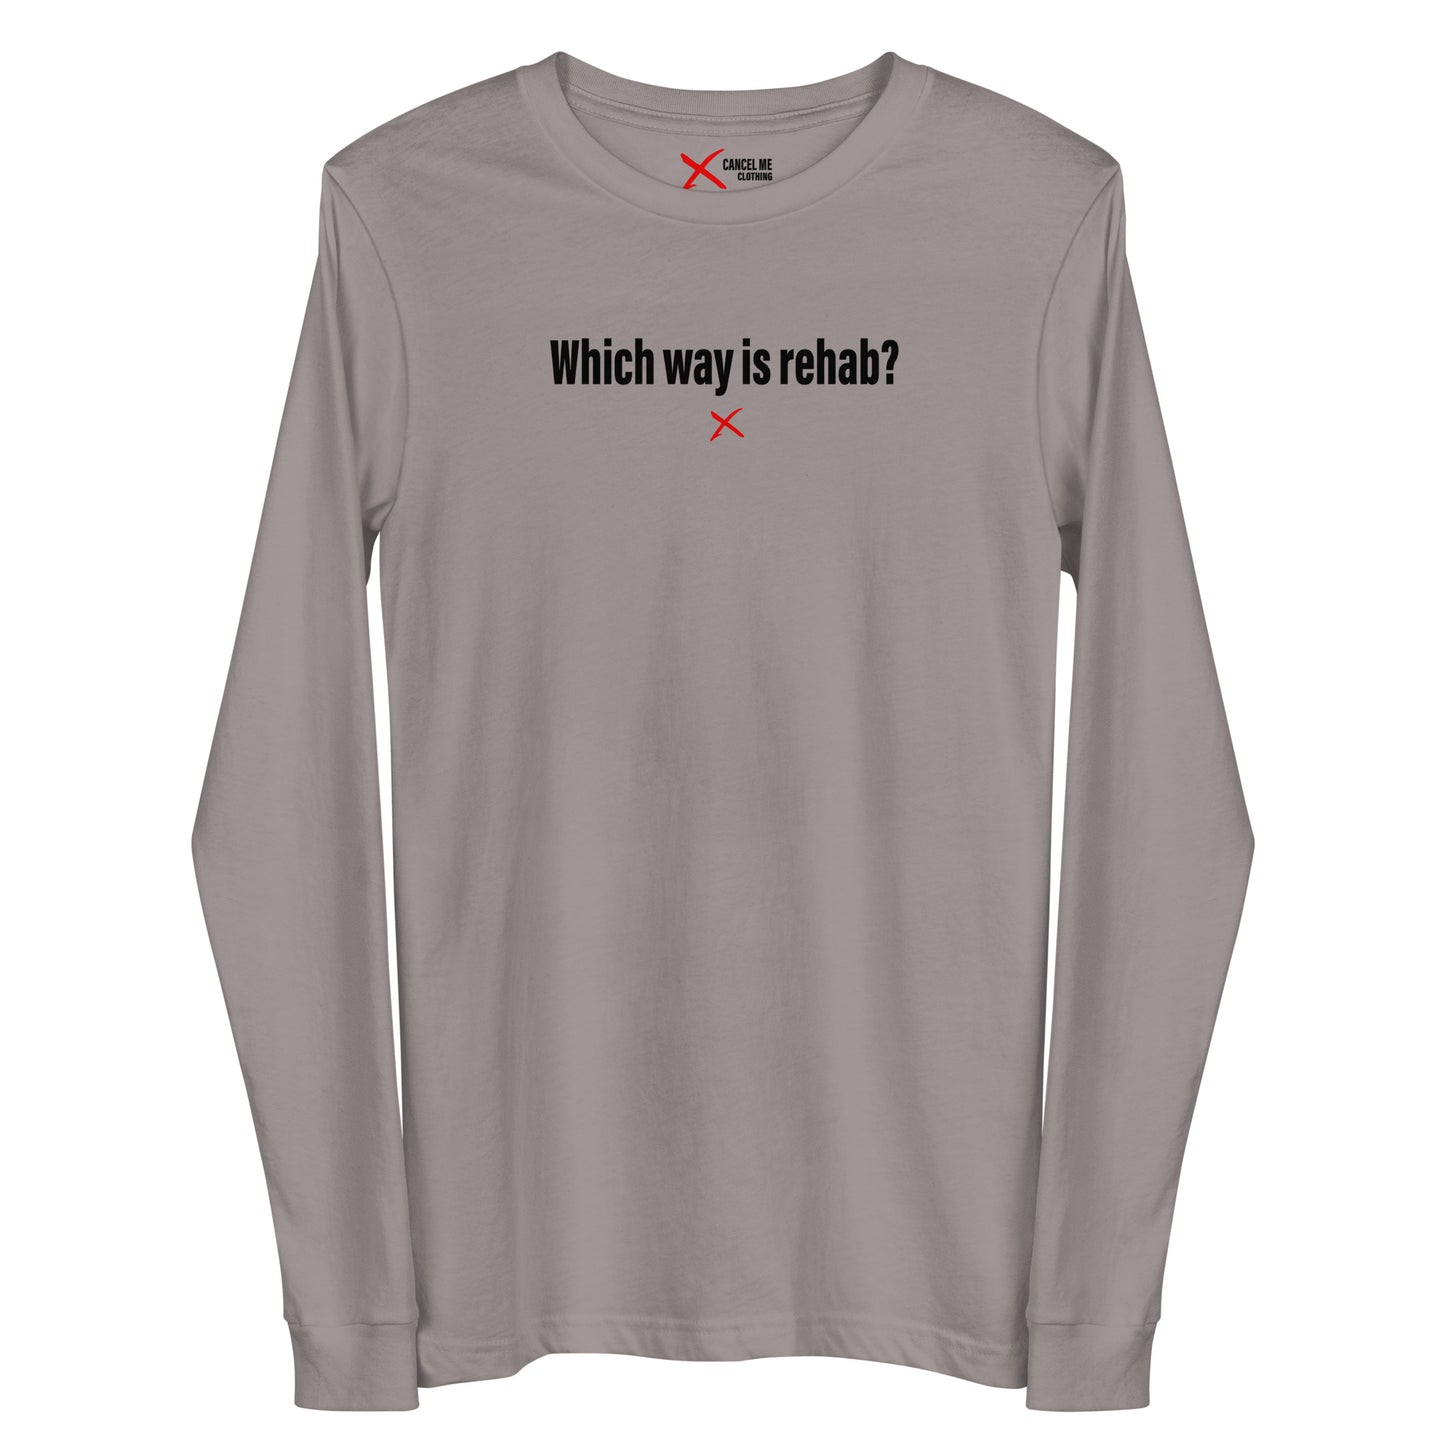 Which way is rehab? - Longsleeve